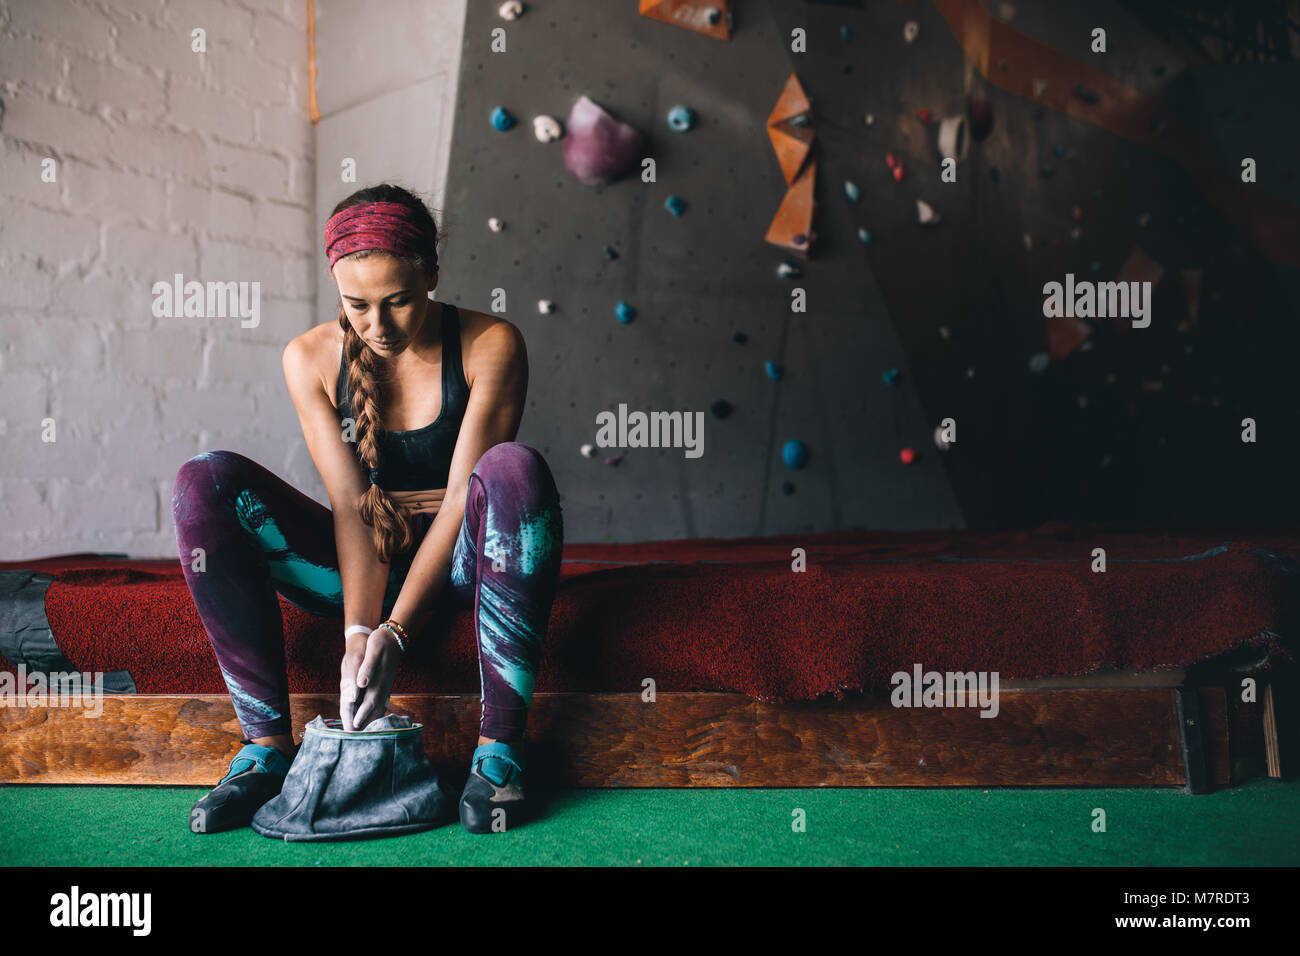 Woman at a wall climbing gym applying magnesium chalk powder on hands from a bag. Artificial bouldering wall in the background. Stock Photo